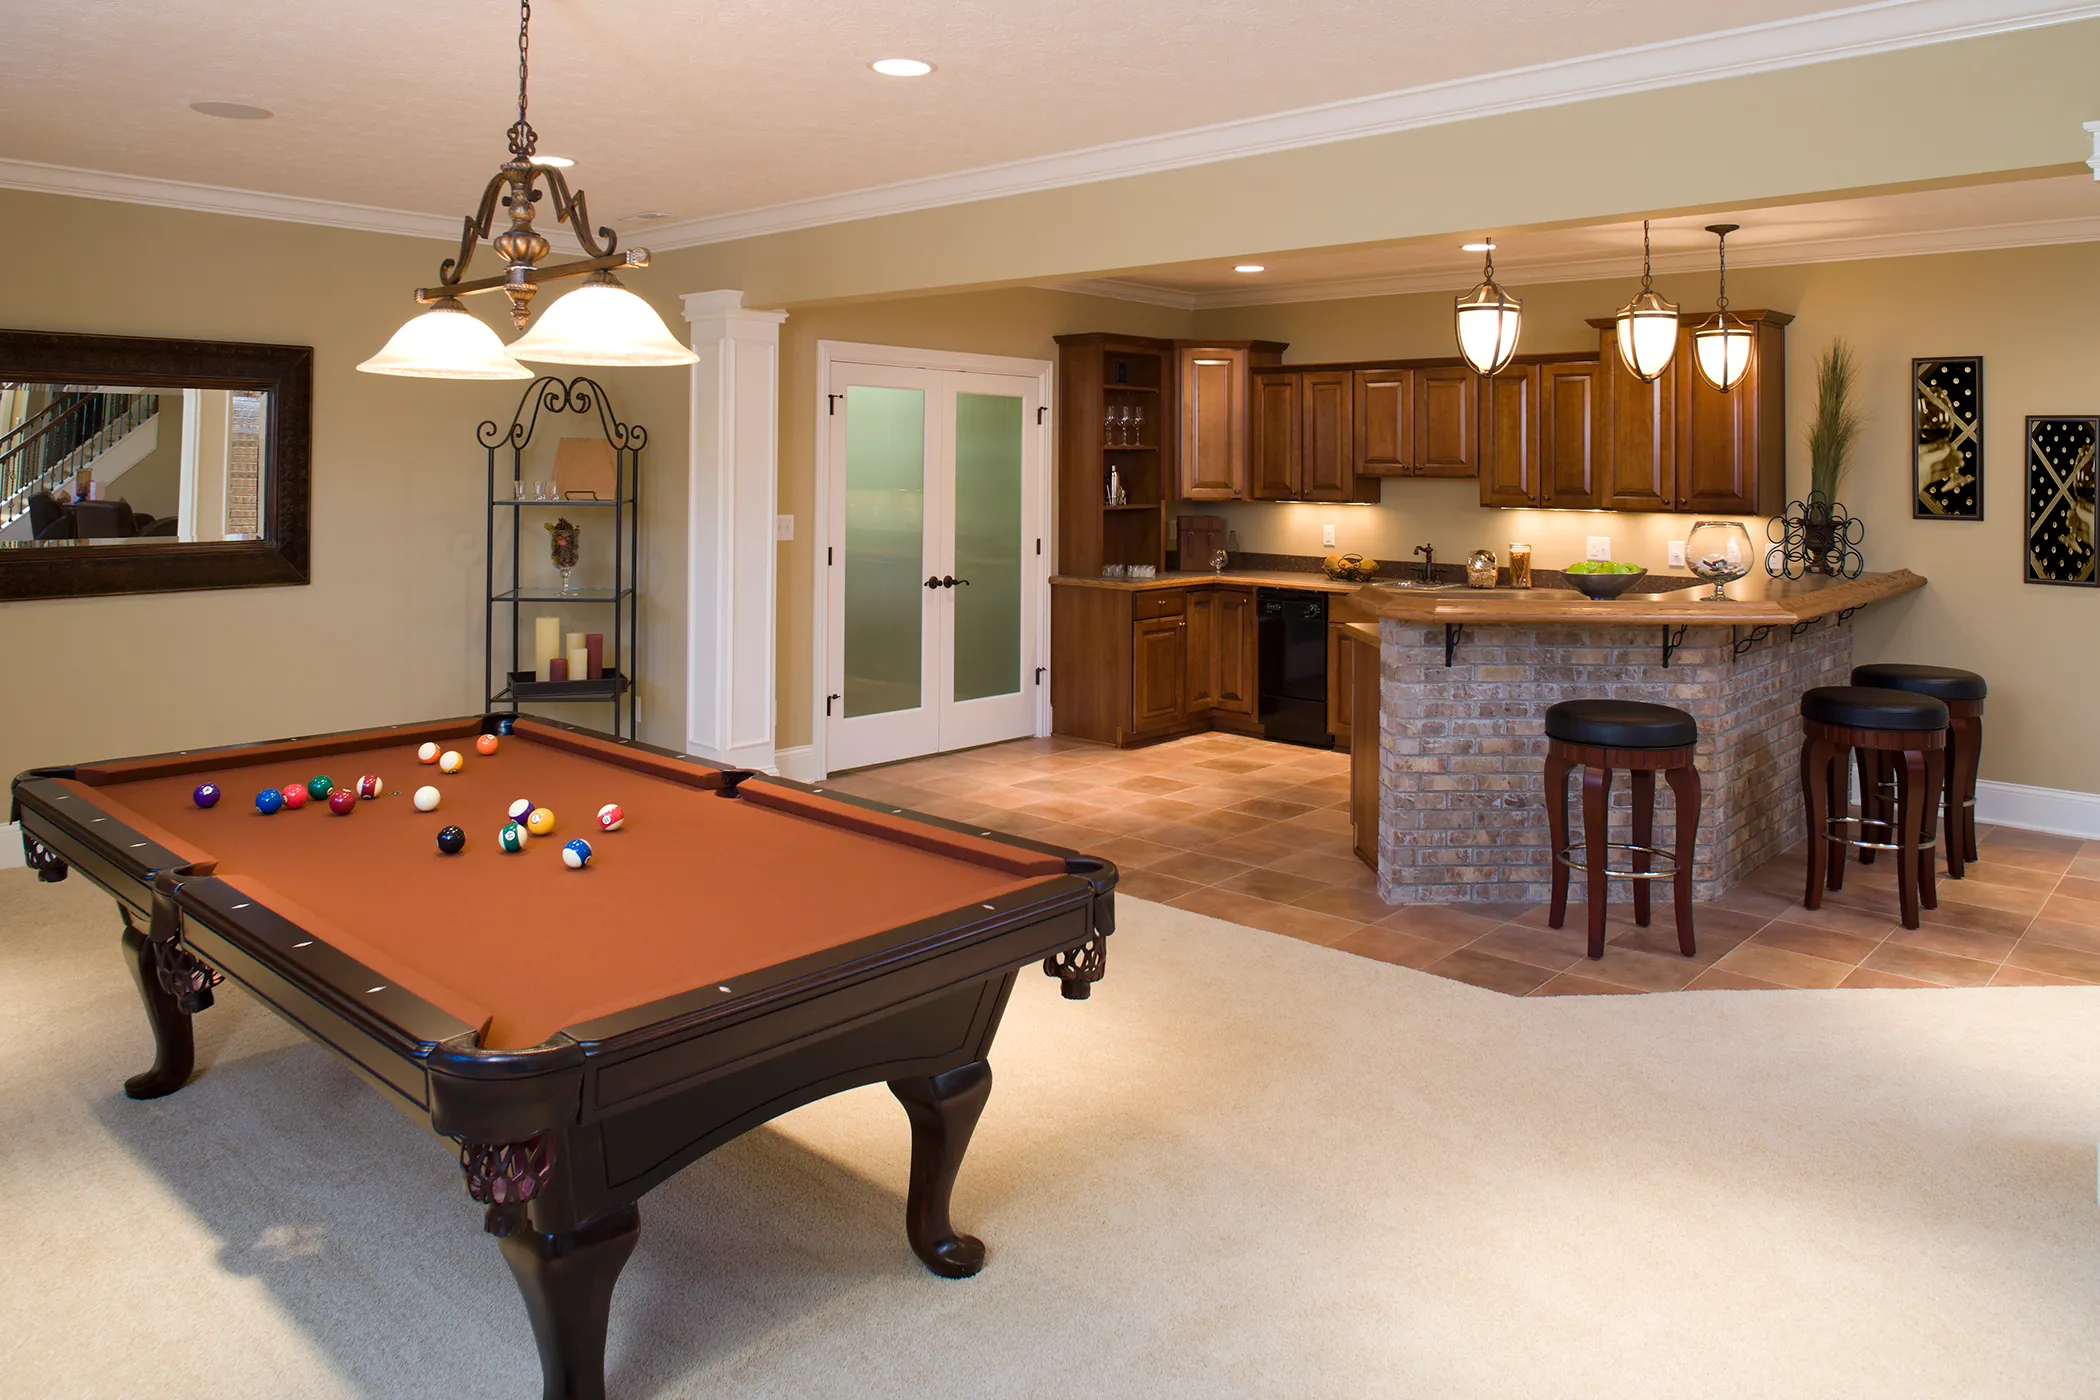 Basement Finishing What You Need To Know Before Remodeling Money